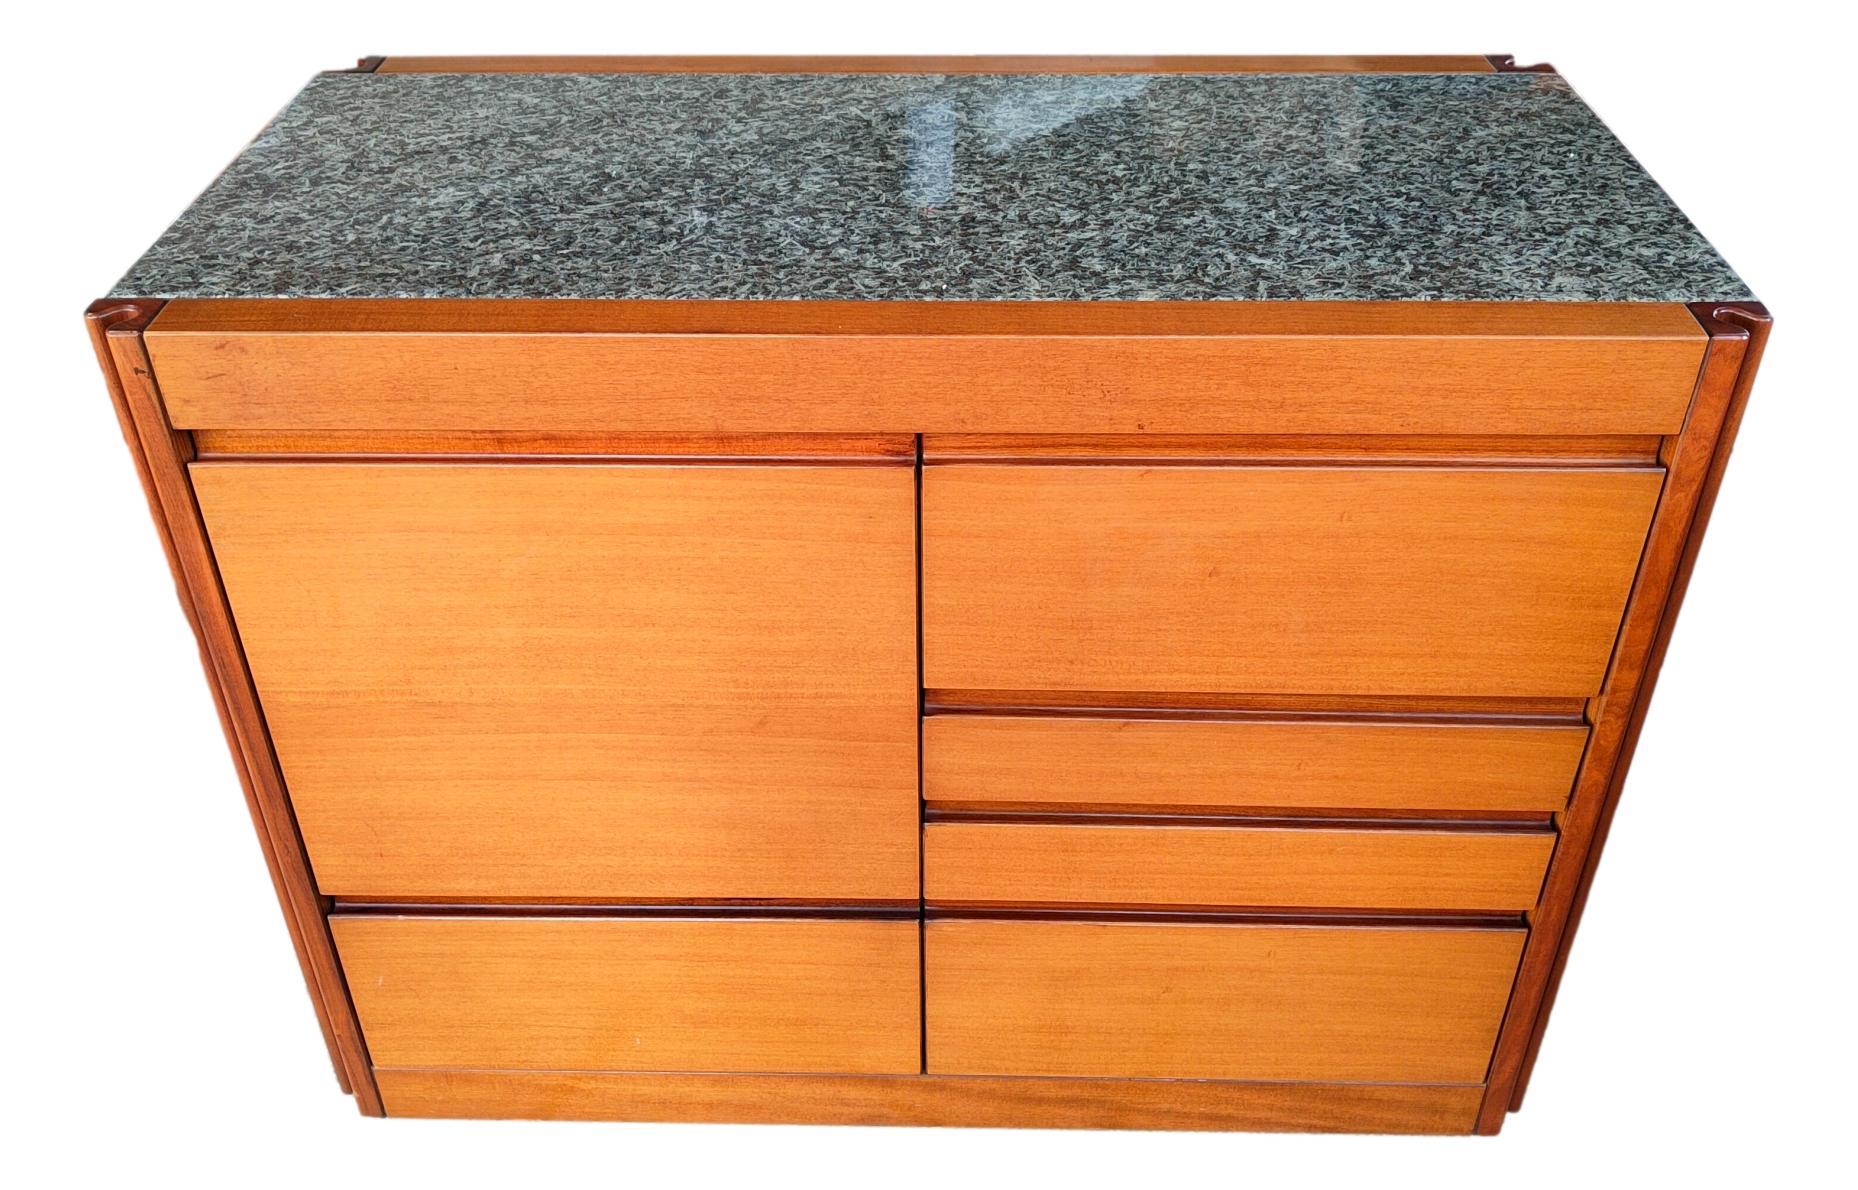 wonderful credenza designed by angelo mangiarotti for Molteni, italy, 1960.
Made in wood wit marble top, in very good conditions.
Only some little signs of time and use, as pics
Look at the other mangiarotti/Molteni items in this store